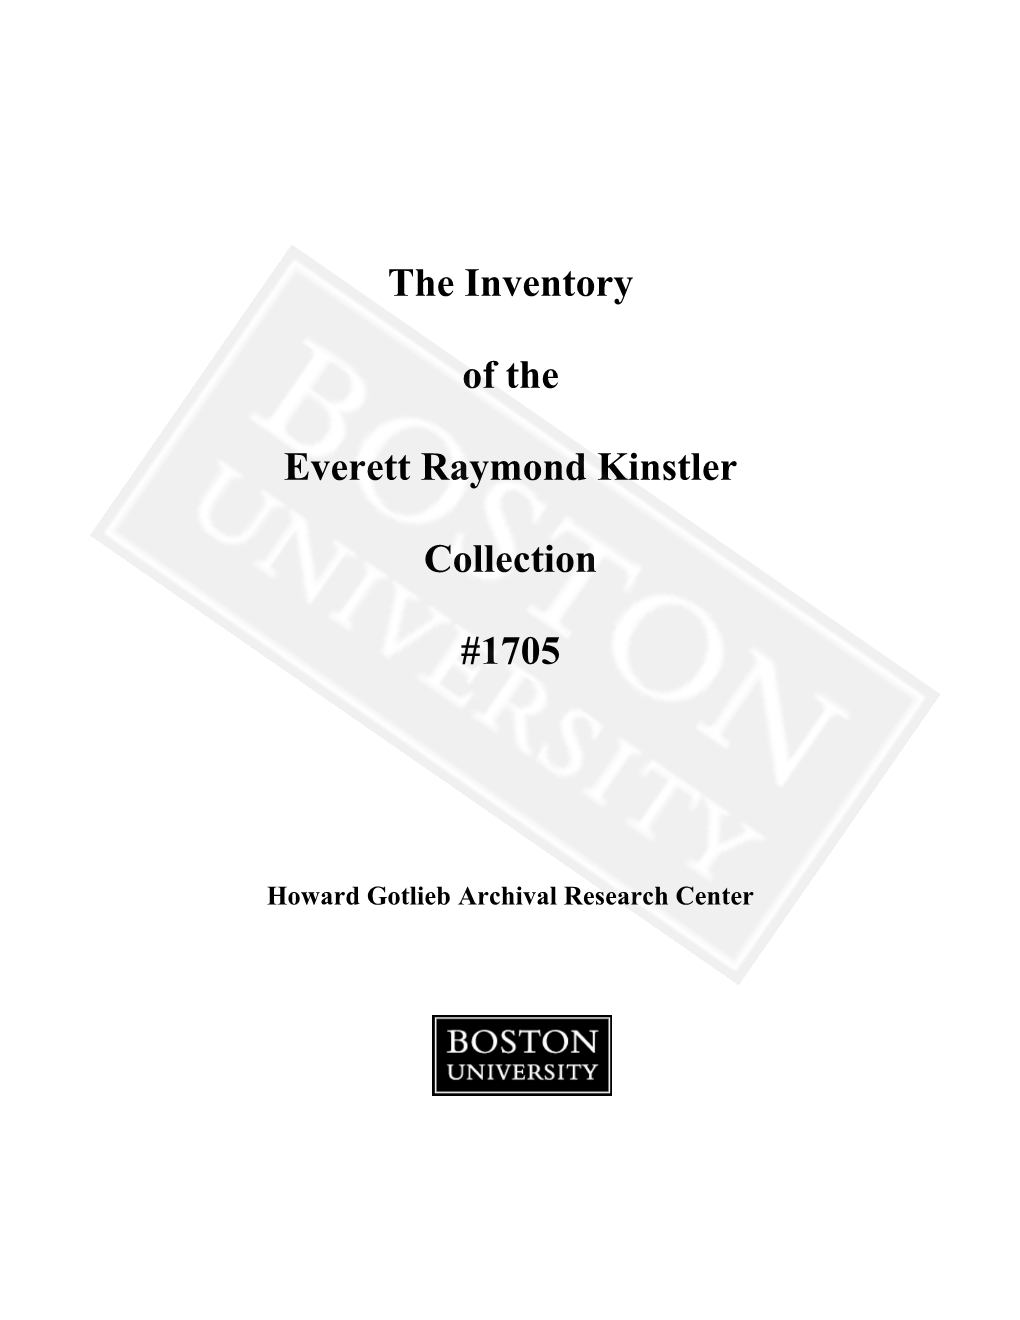 The Inventory of the Everett Raymond Kinstler Collection #1705